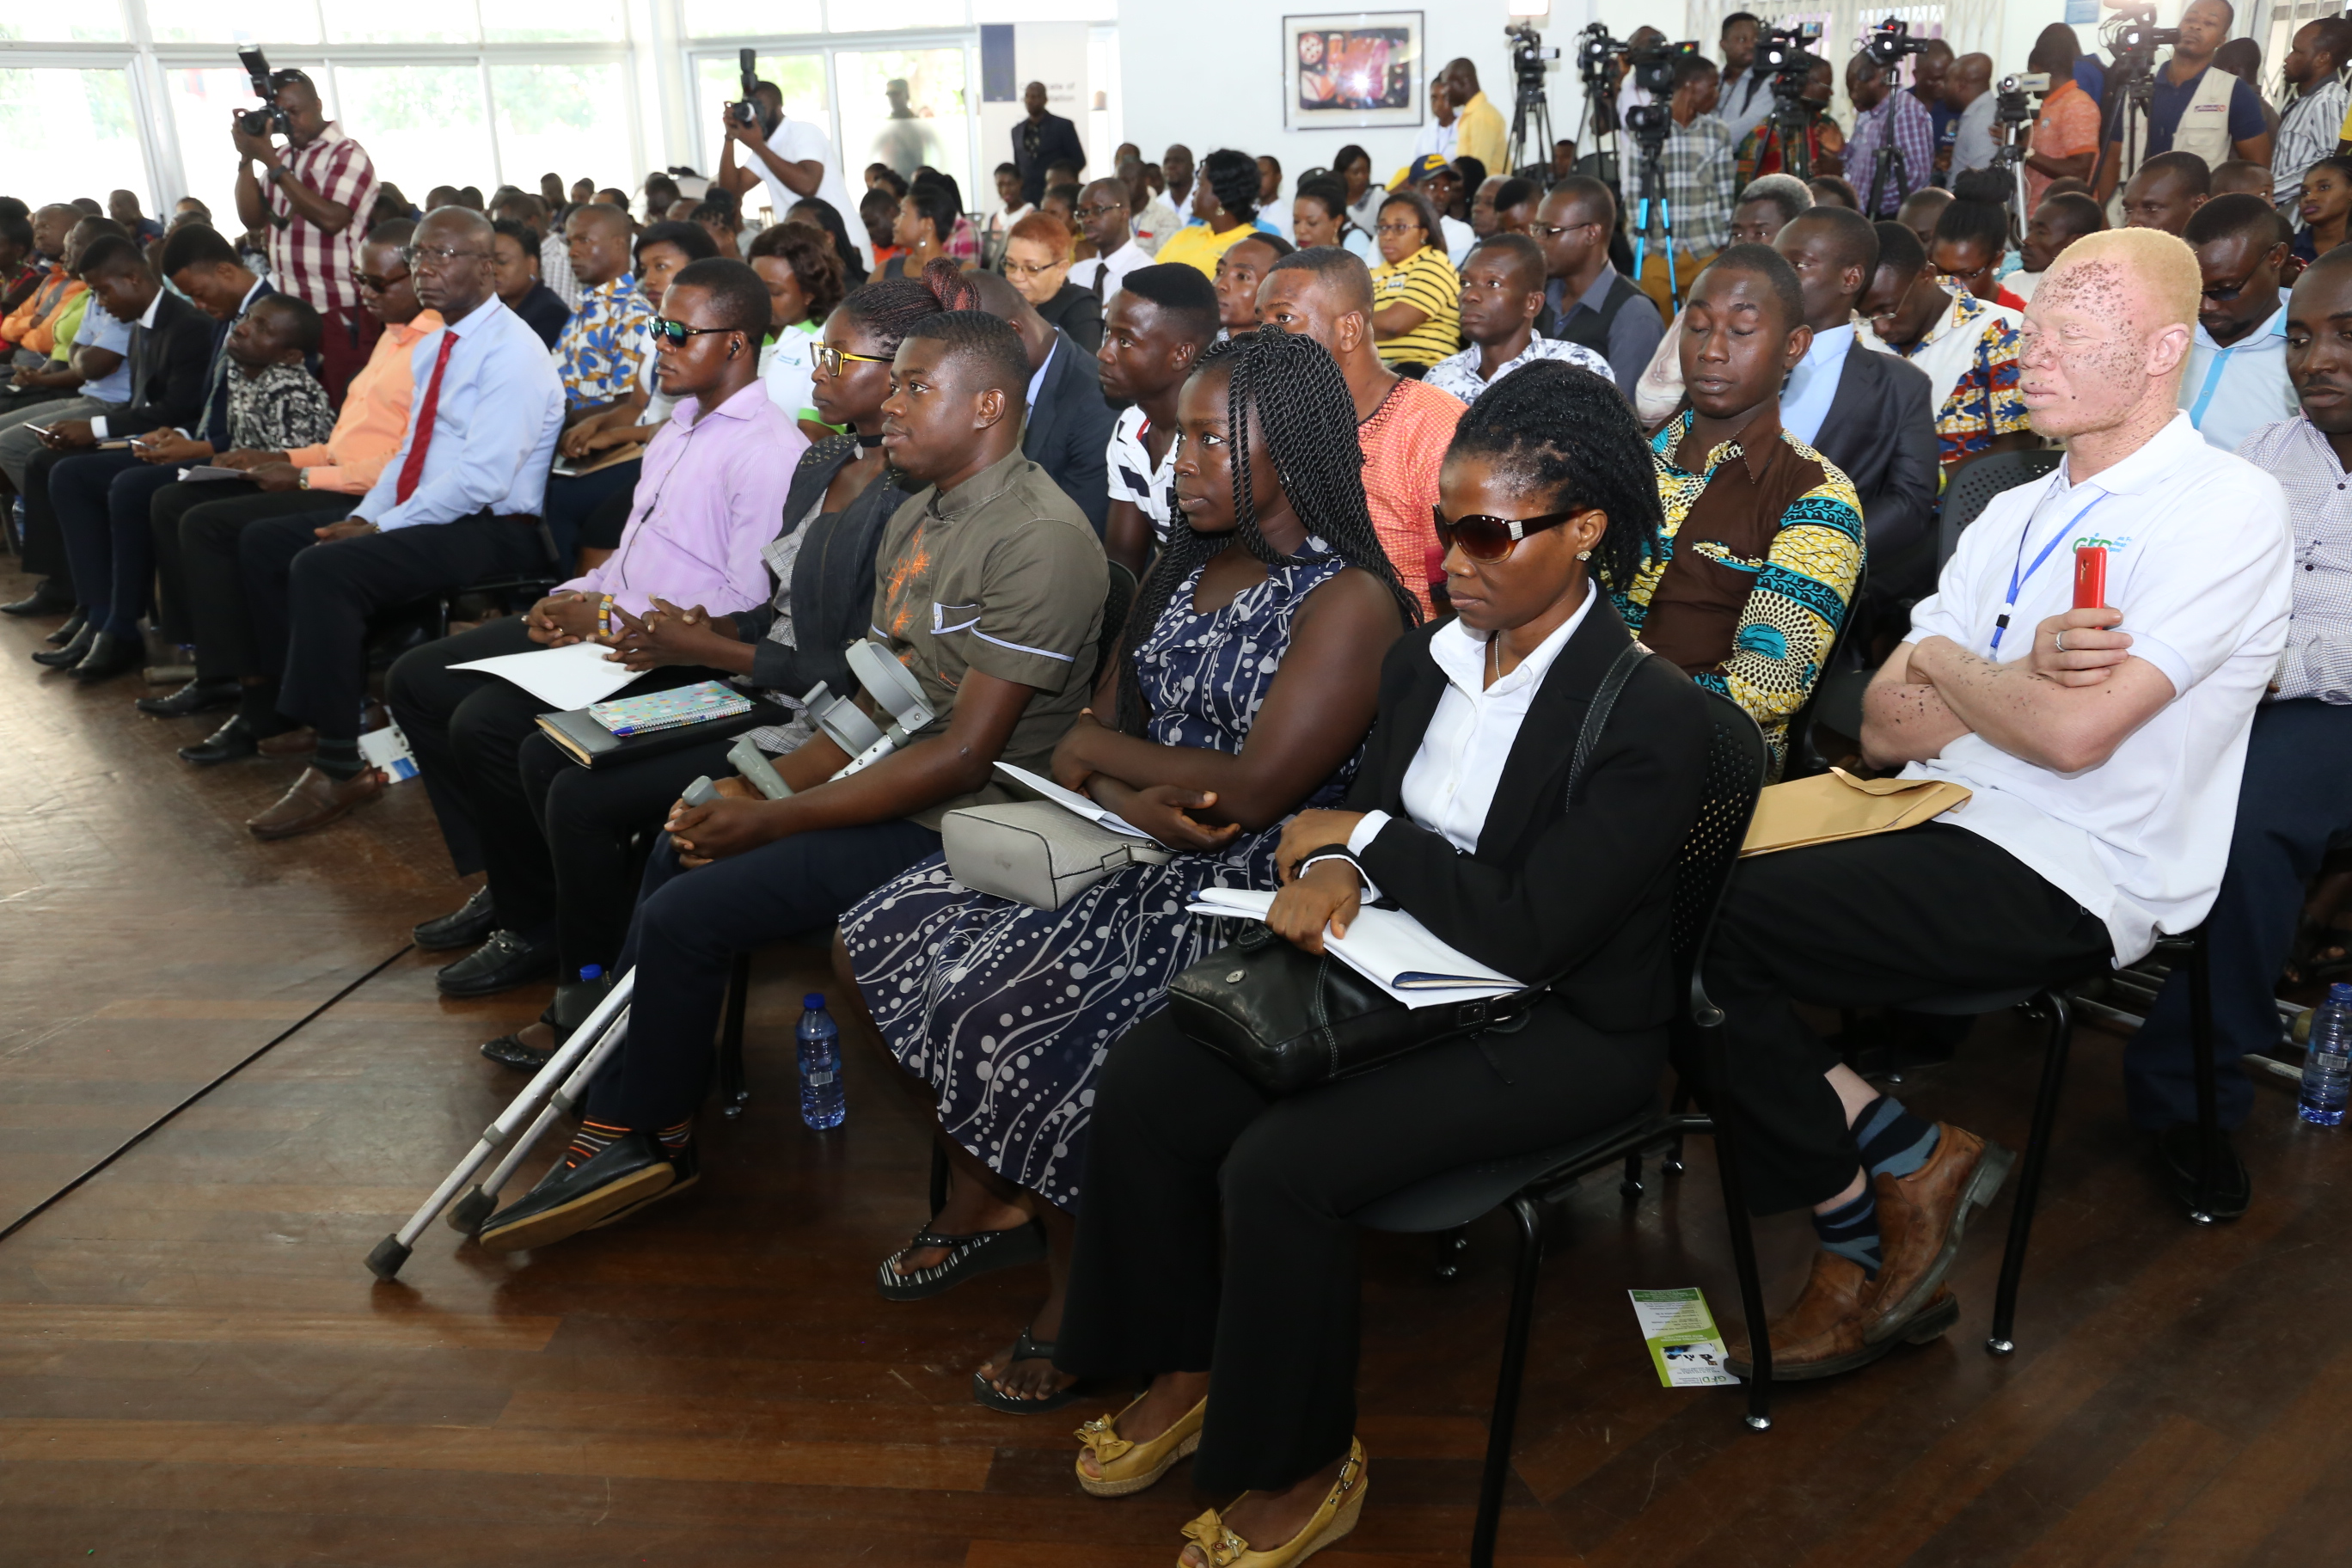 Some of the participants at the Career Fair for Persons with Disability in Accra